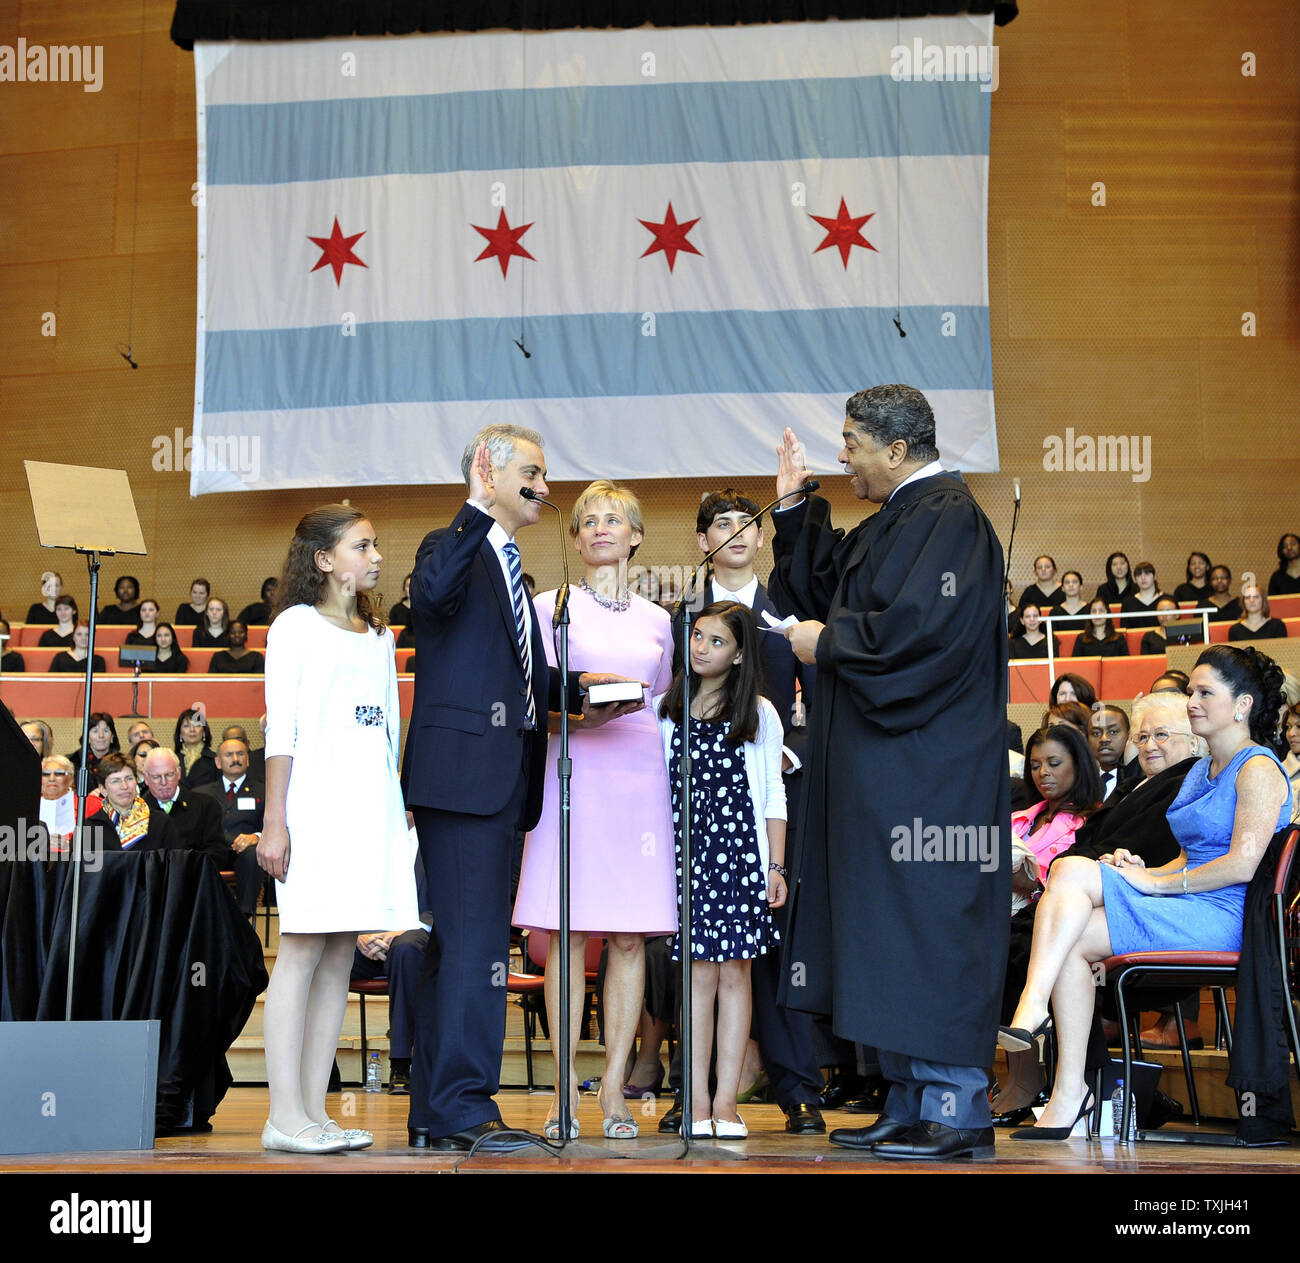 Rahm Emanuel accompanied by his daughter Ilana (L-R) wife Amy Rule, daughter Leah and son Zach, is sworn as mayor of Chicago by Cook County Circuit Court Judge Timothy Evans (R) during an inaugural ceremony at Millennium Park on May 16, 2011. Emanuel takes over for Richard M. Daley, who had served in the post since 1989.     UPI/Brian Kersey Stock Photo